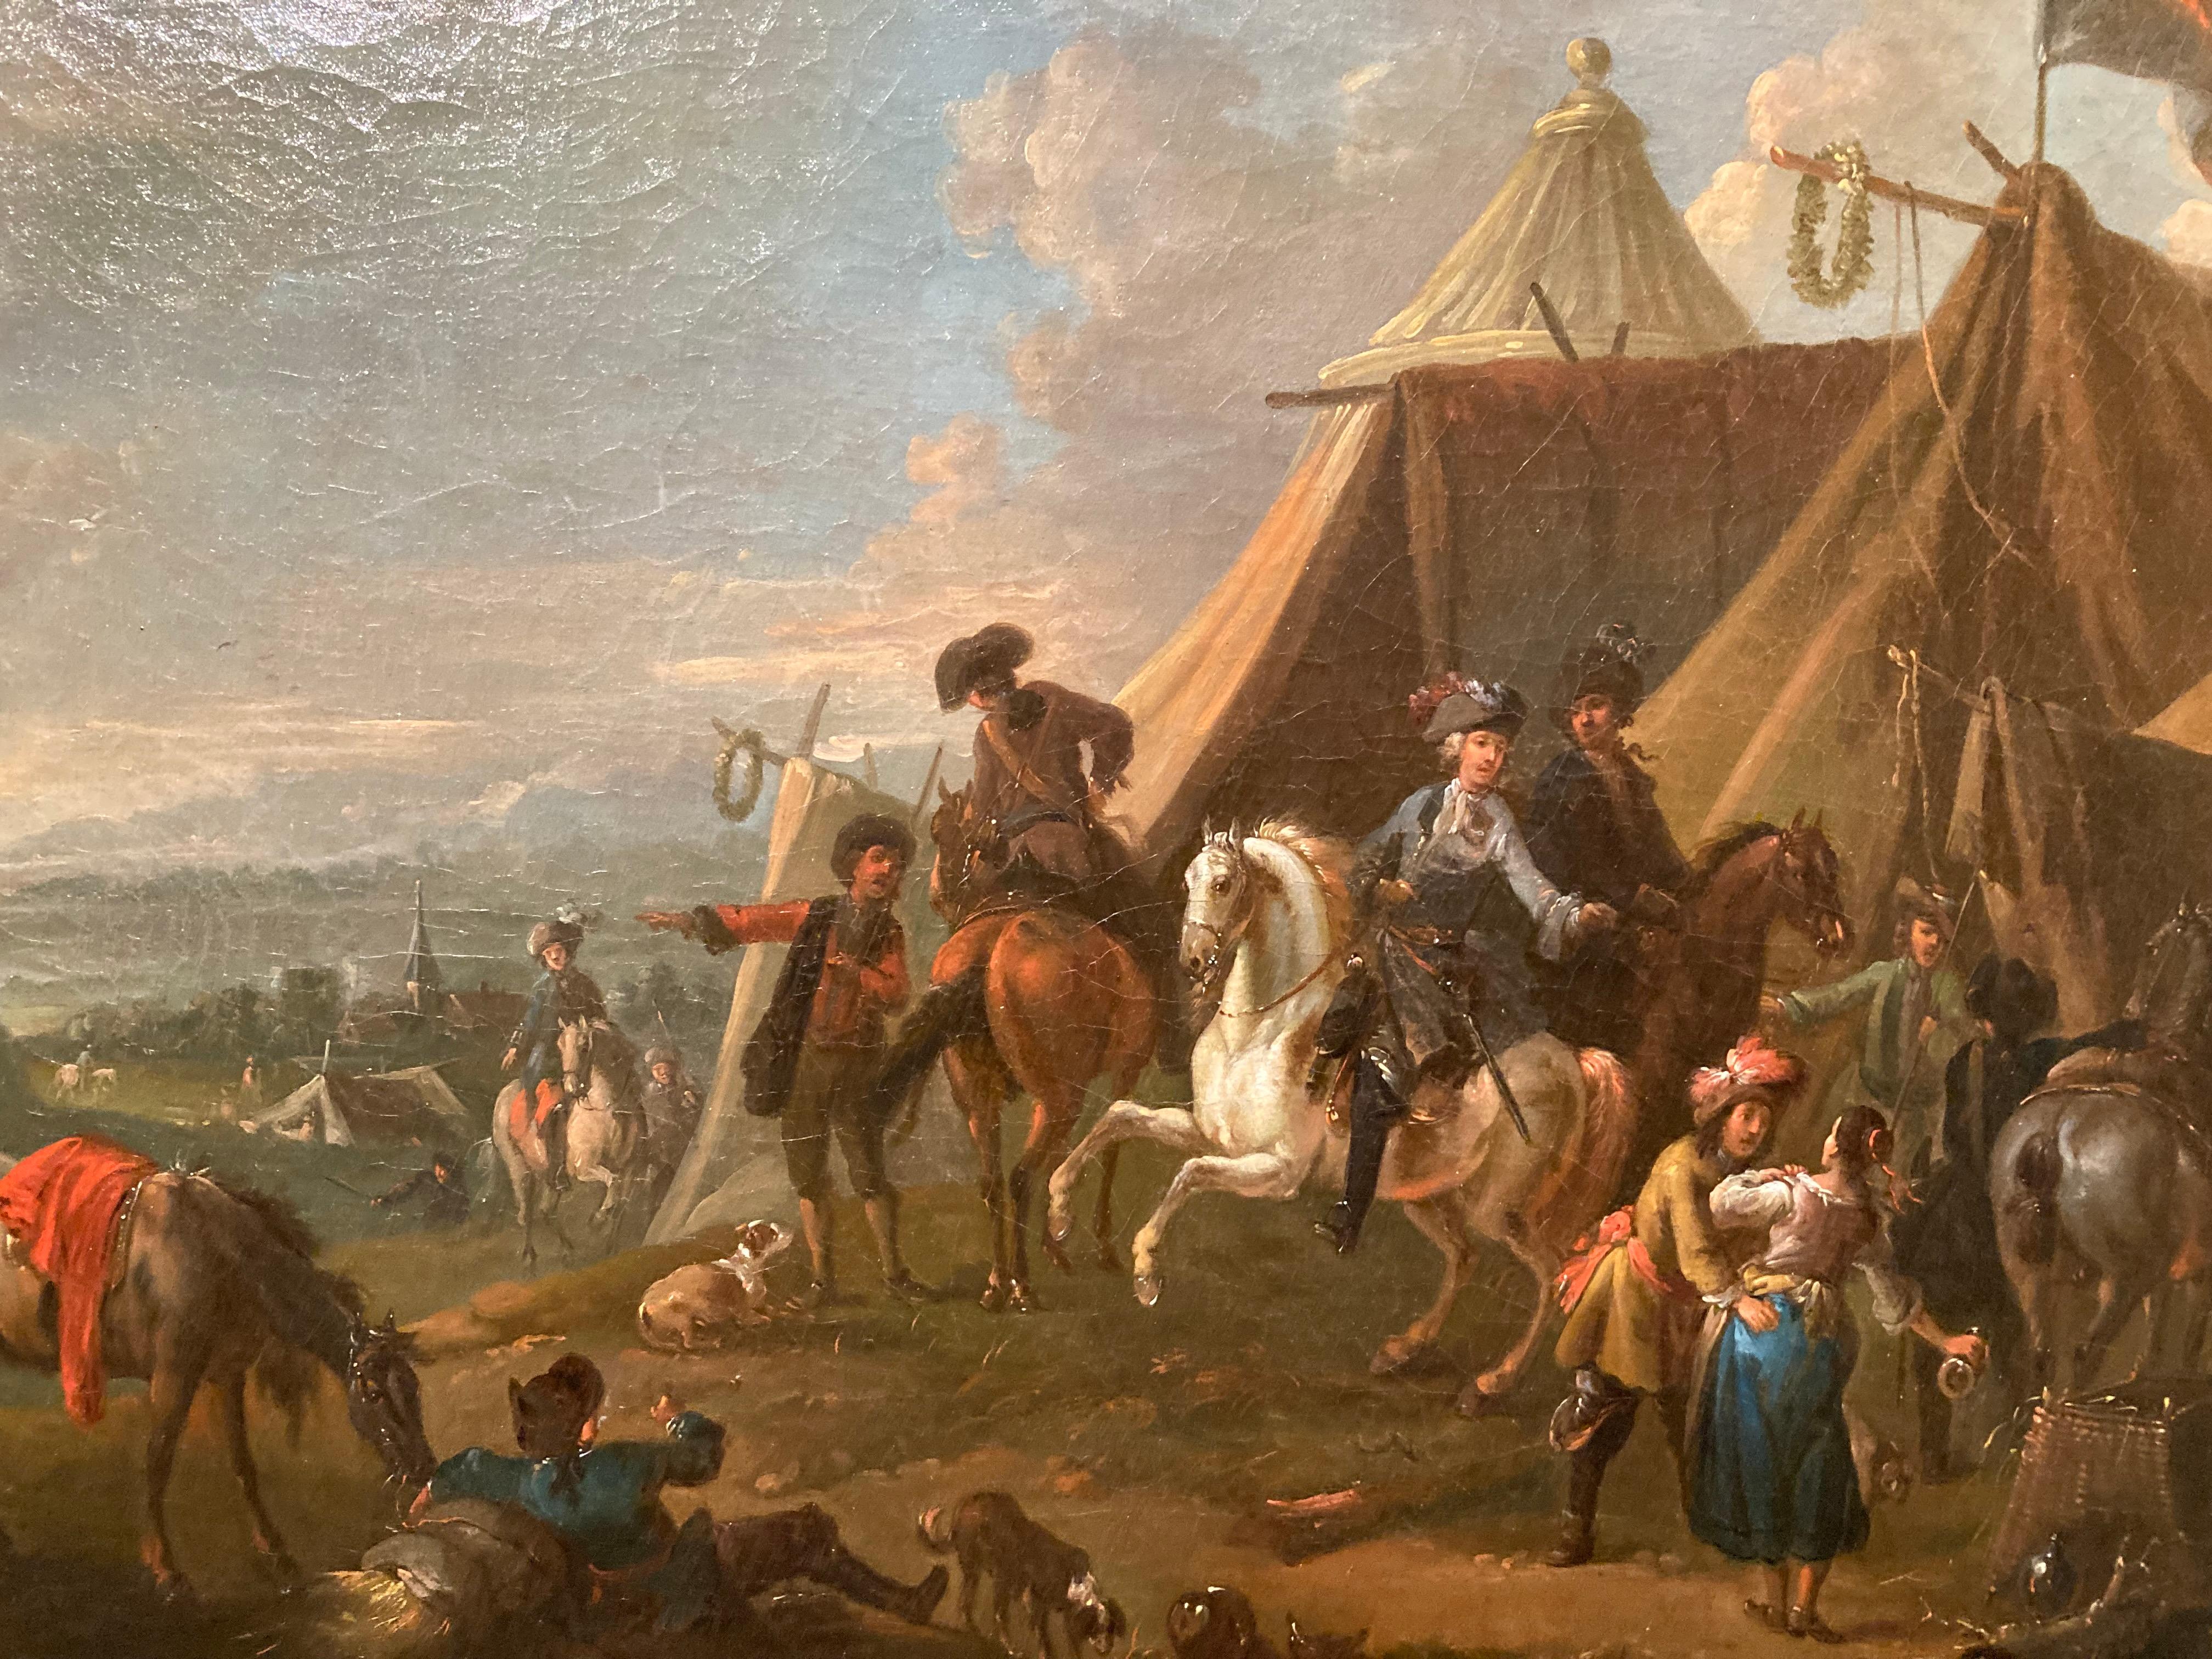 Soldiers by a Tent, Soldiers Camp, Circle Van Huchtenburg, Old Master Painting - Brown Landscape Painting by Jan van Huchtenburg